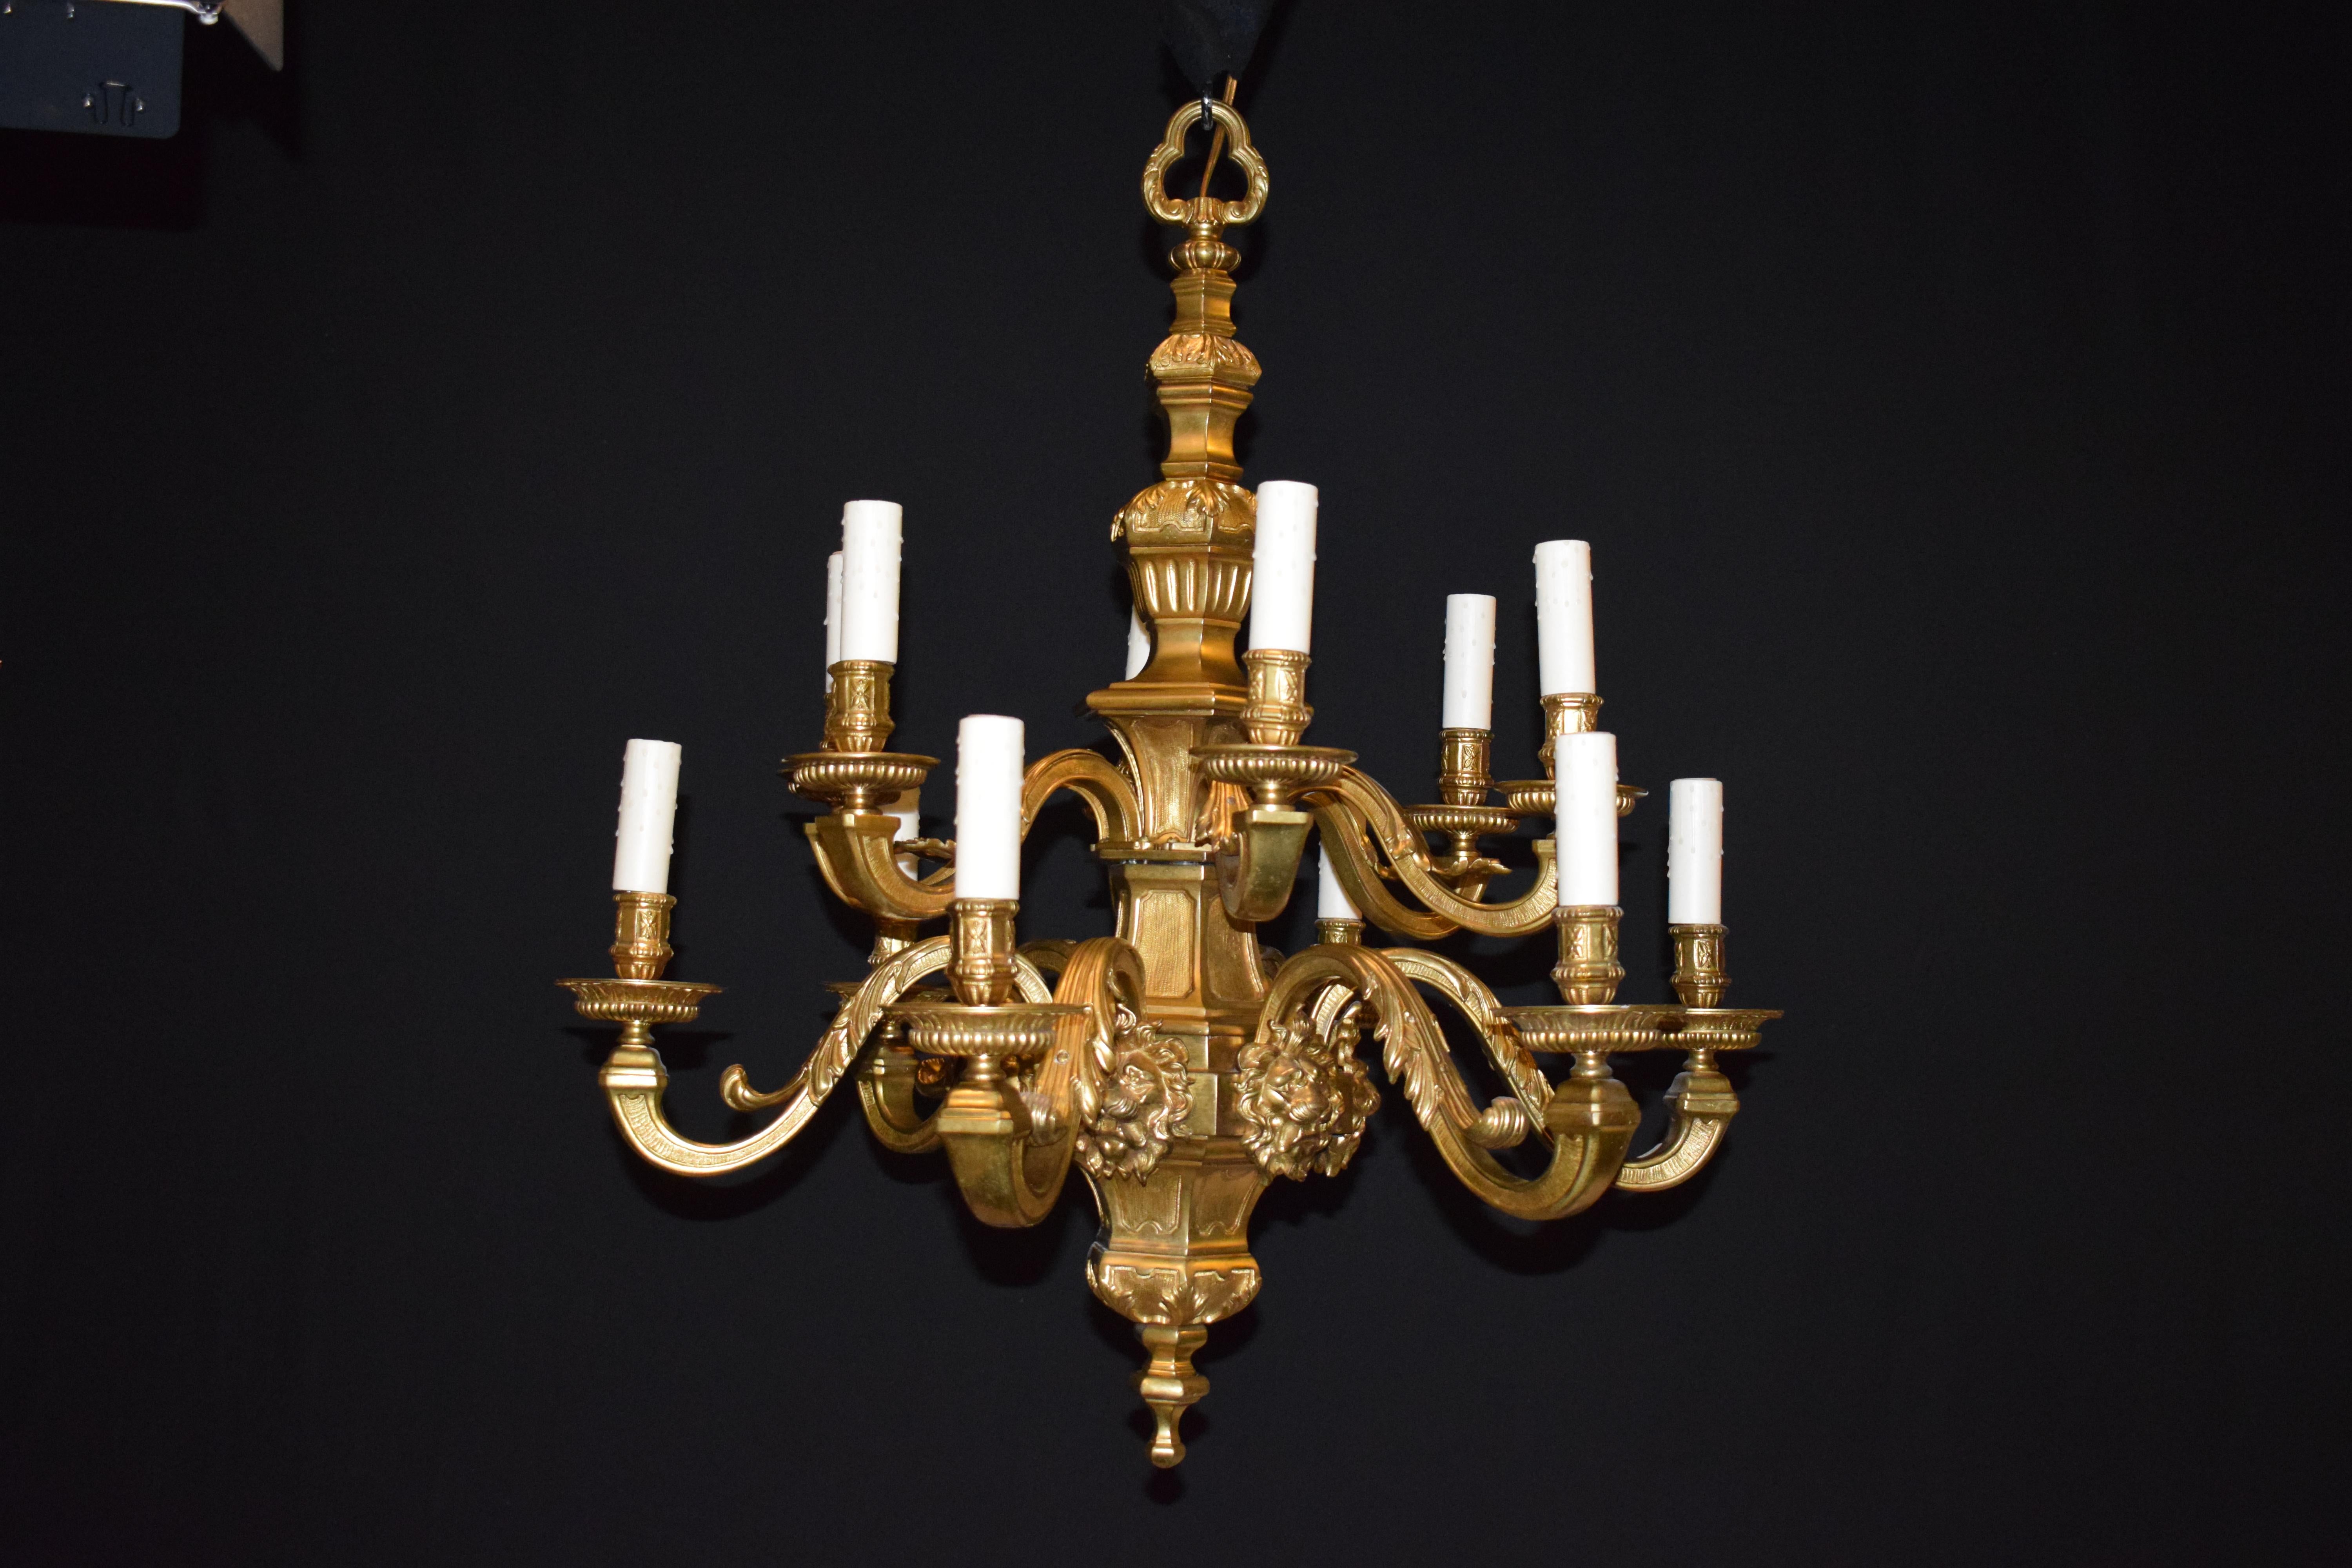 A very fine gilt bronze chandelier, in the Regence style, featuring lion masks. 12-light (six on the top & six on the bottom), France, circa 1910.
Dimensions: Height 37